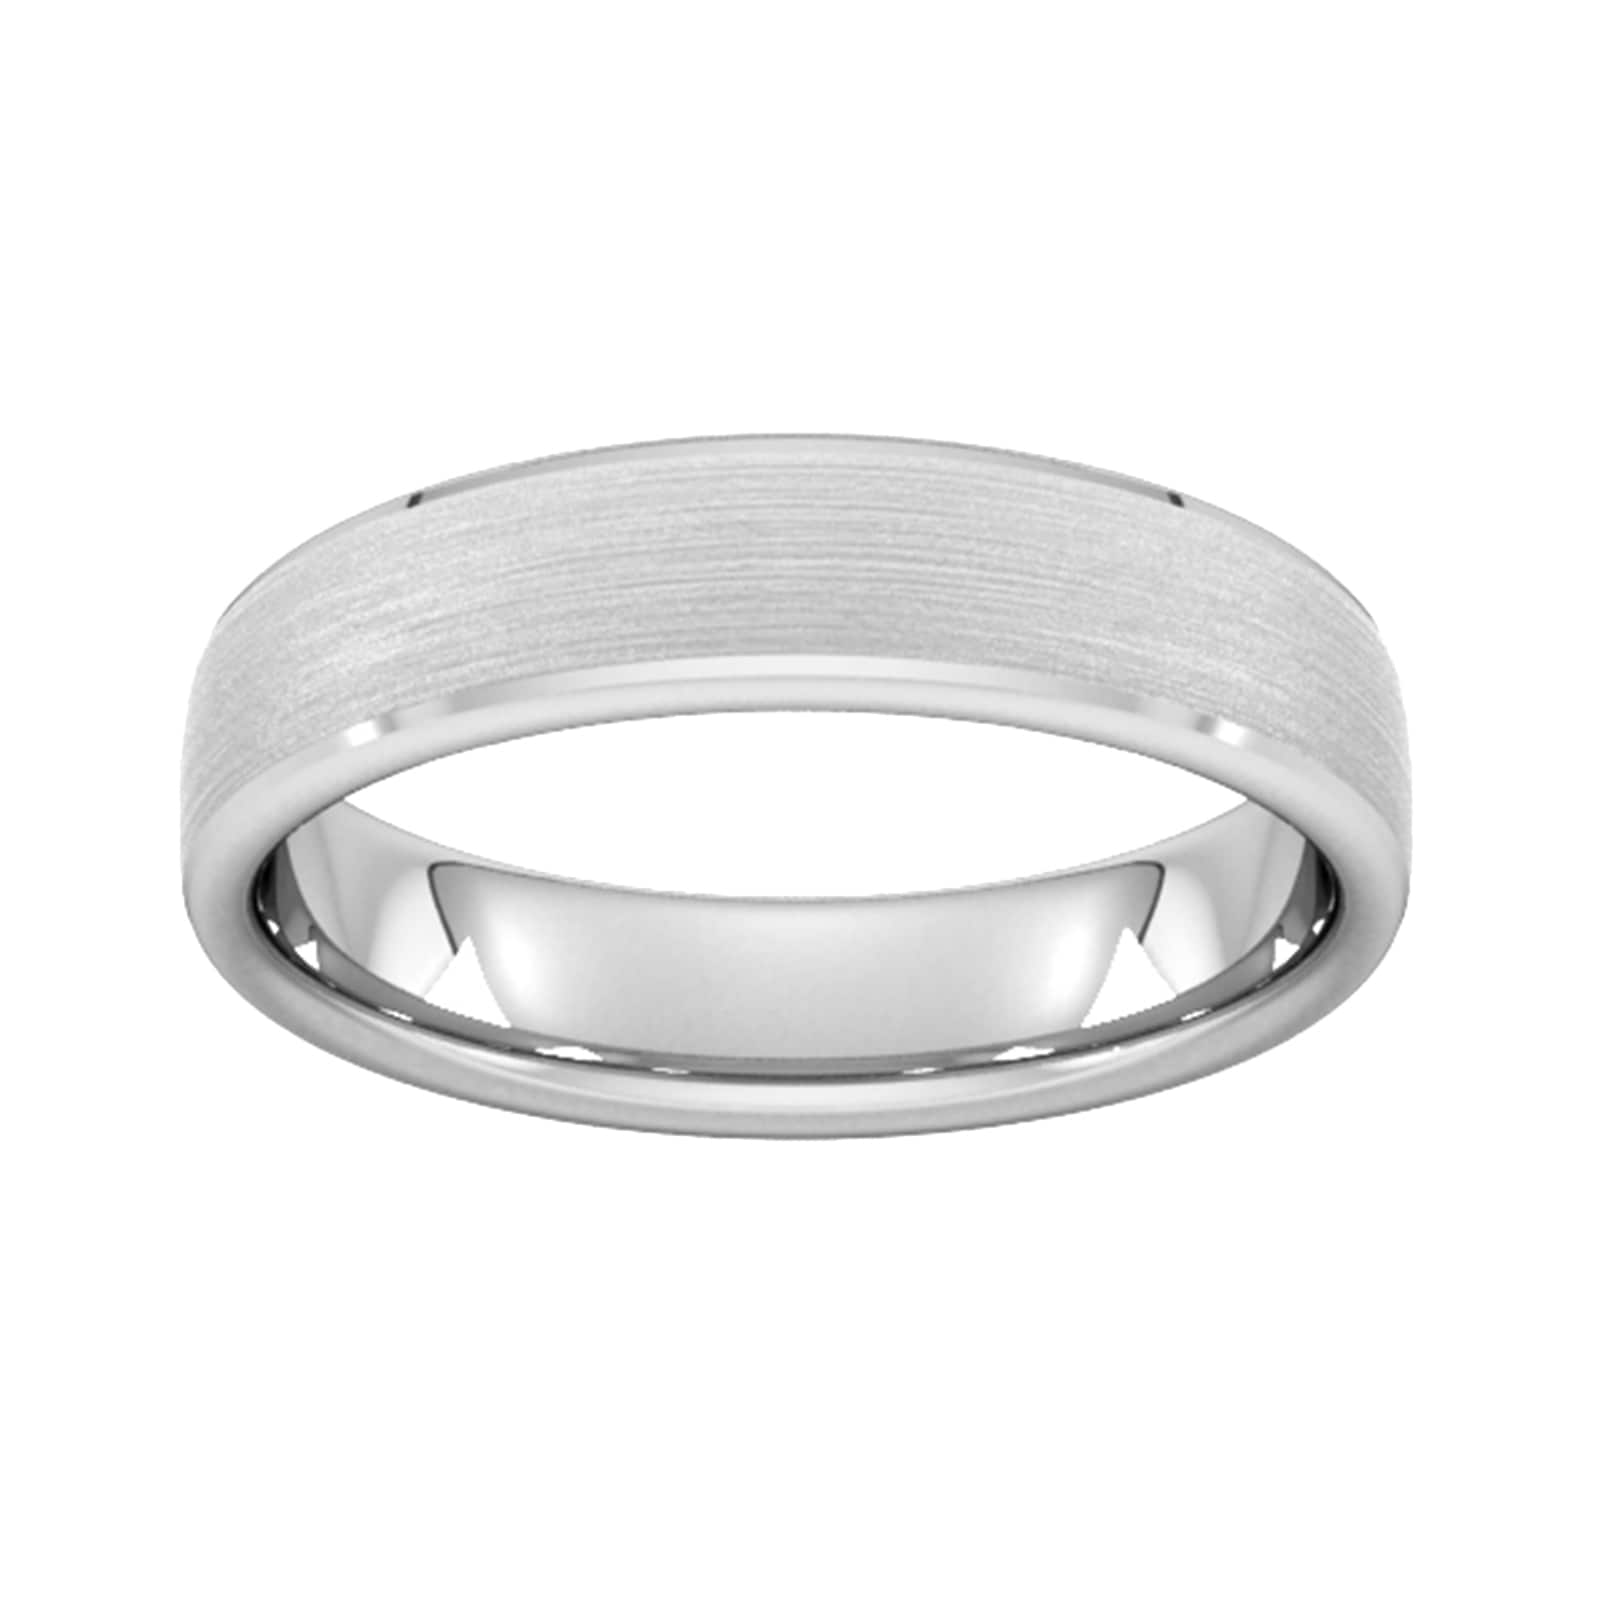 5mm Traditional Court Heavy Polished Chamfered Edges With Matt Centre Wedding Ring In 18 Carat White Gold - Ring Size G